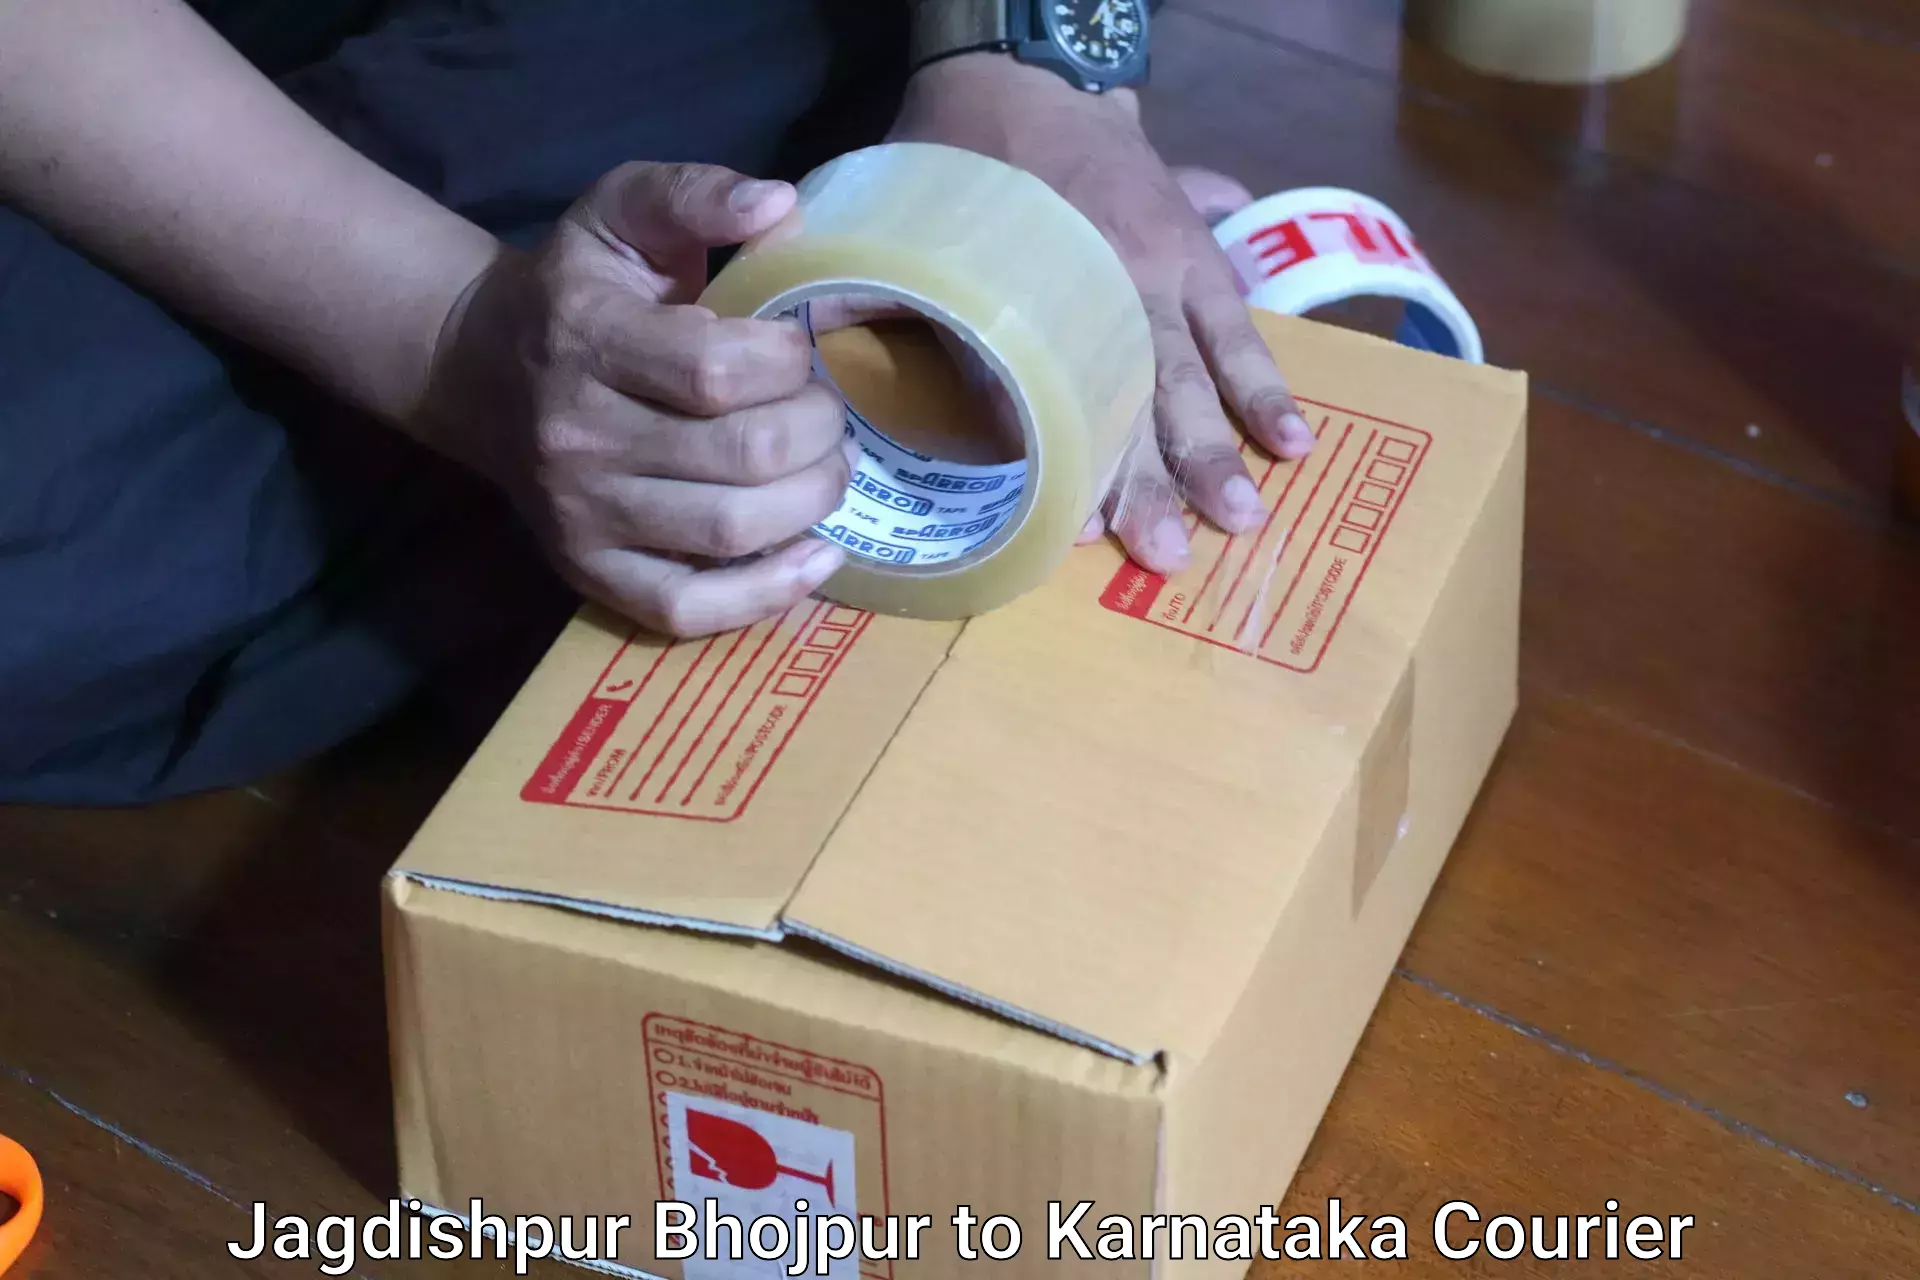 Single item baggage courier Jagdishpur Bhojpur to Manipal